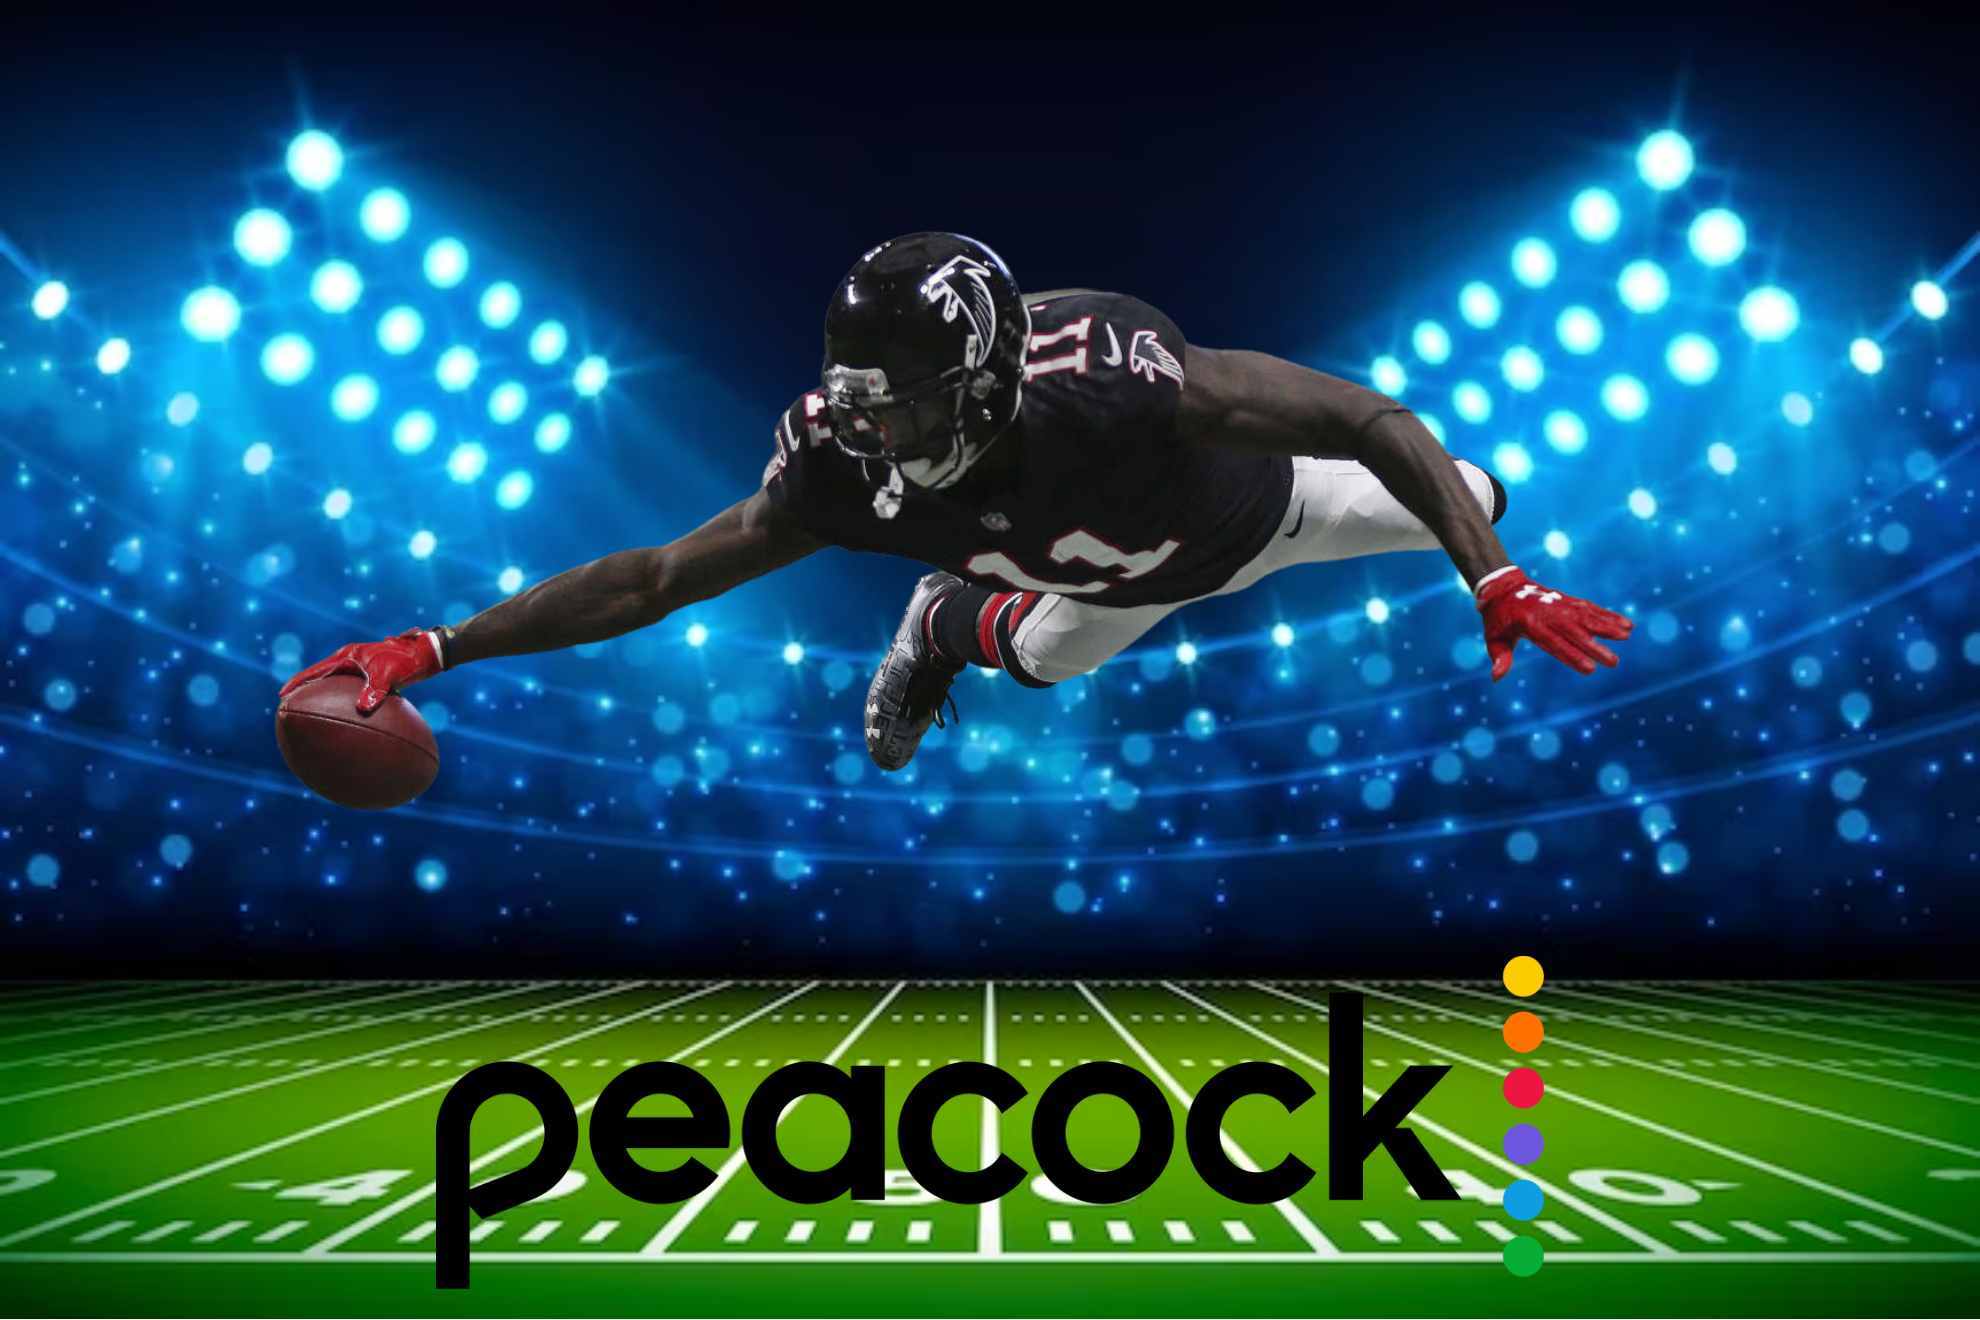 can you get sunday night football on peacock